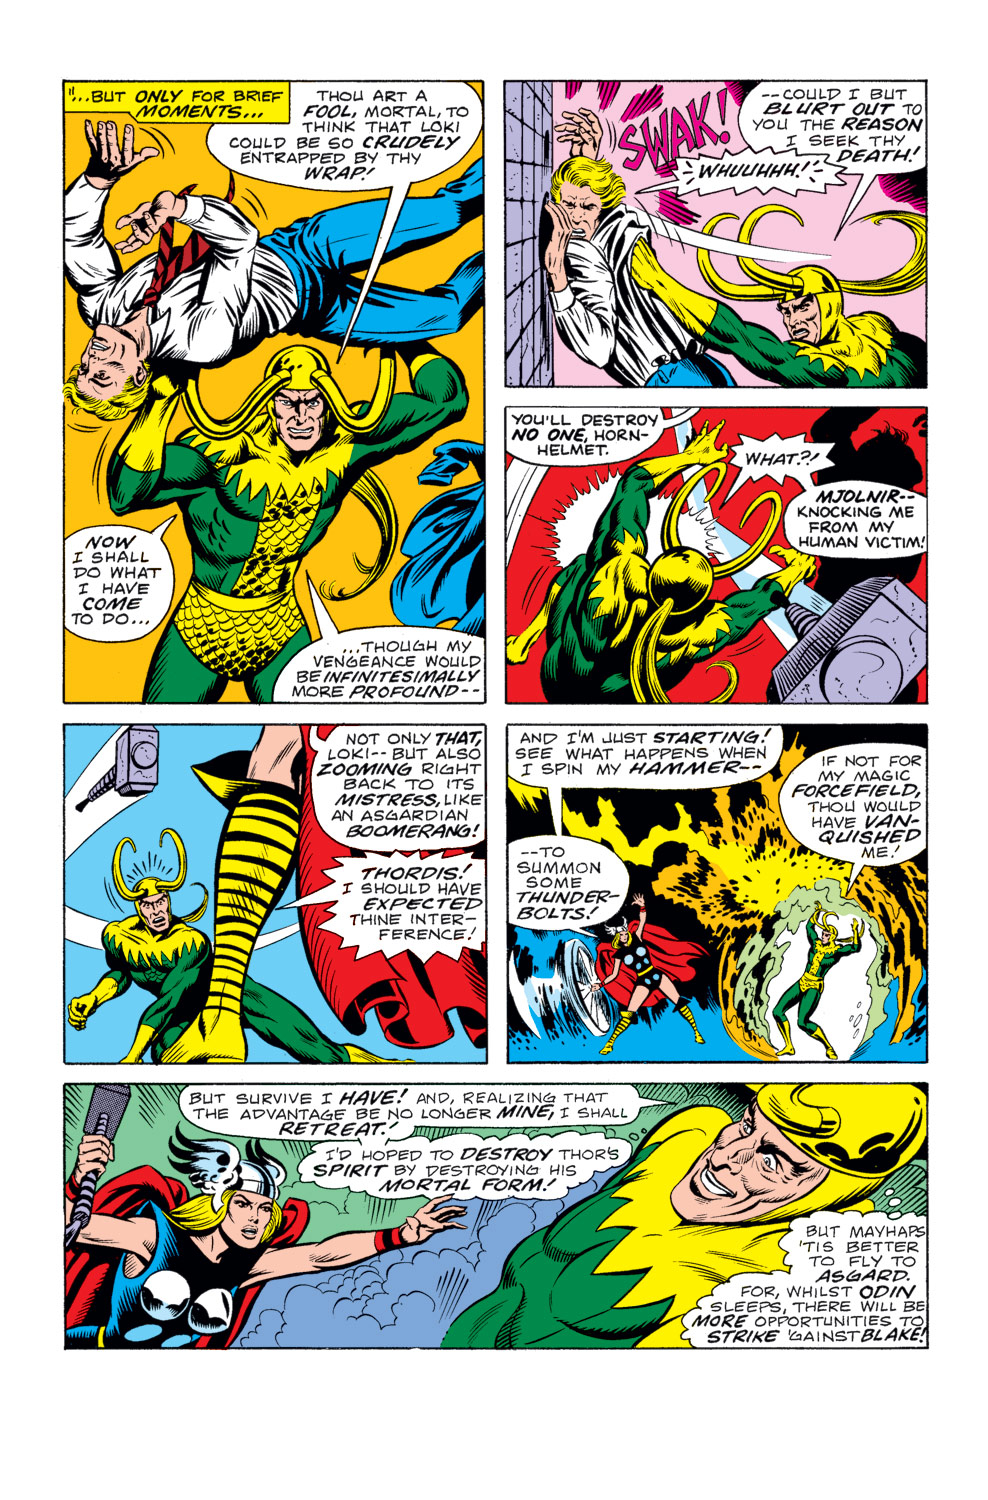 What If? (1977) issue 10 - Jane Foster had found the hammer of Thor - Page 26